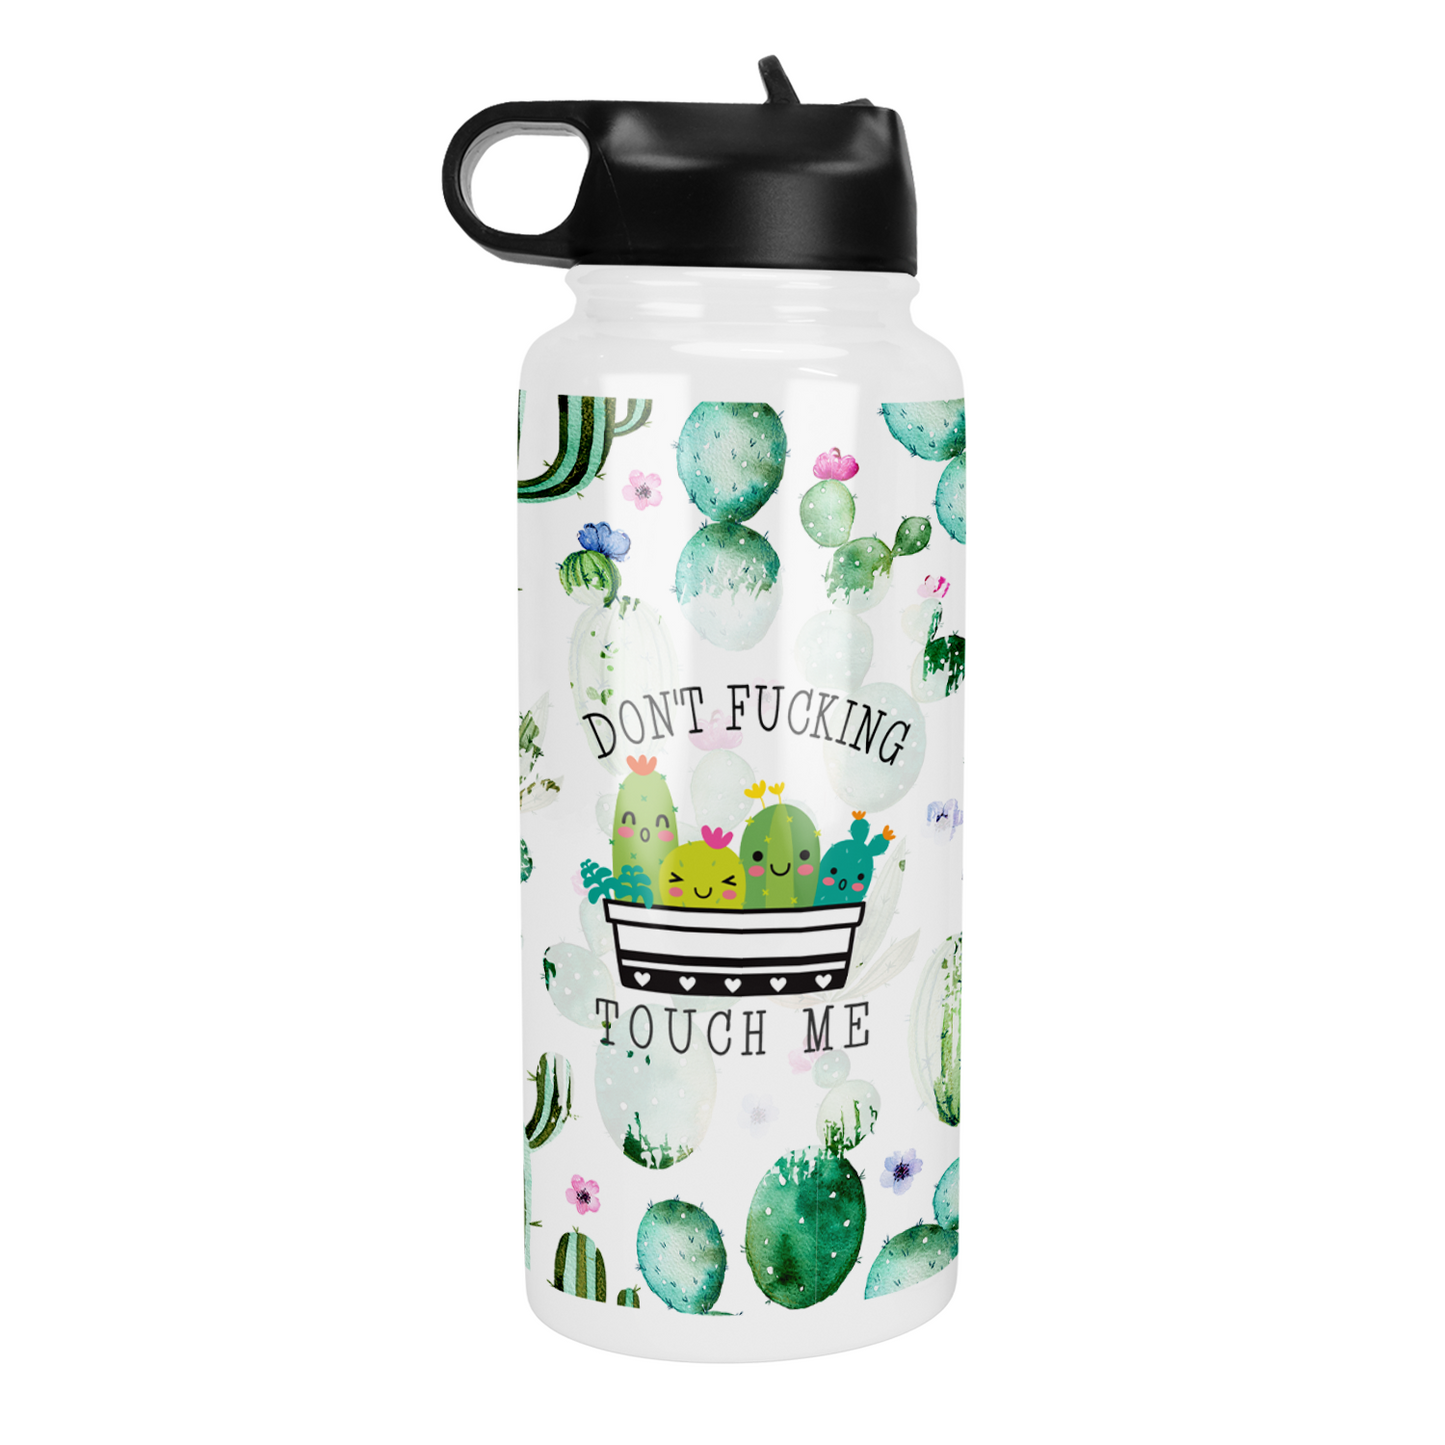 Don't Fucking Touch Me 32 Oz Waterbottle